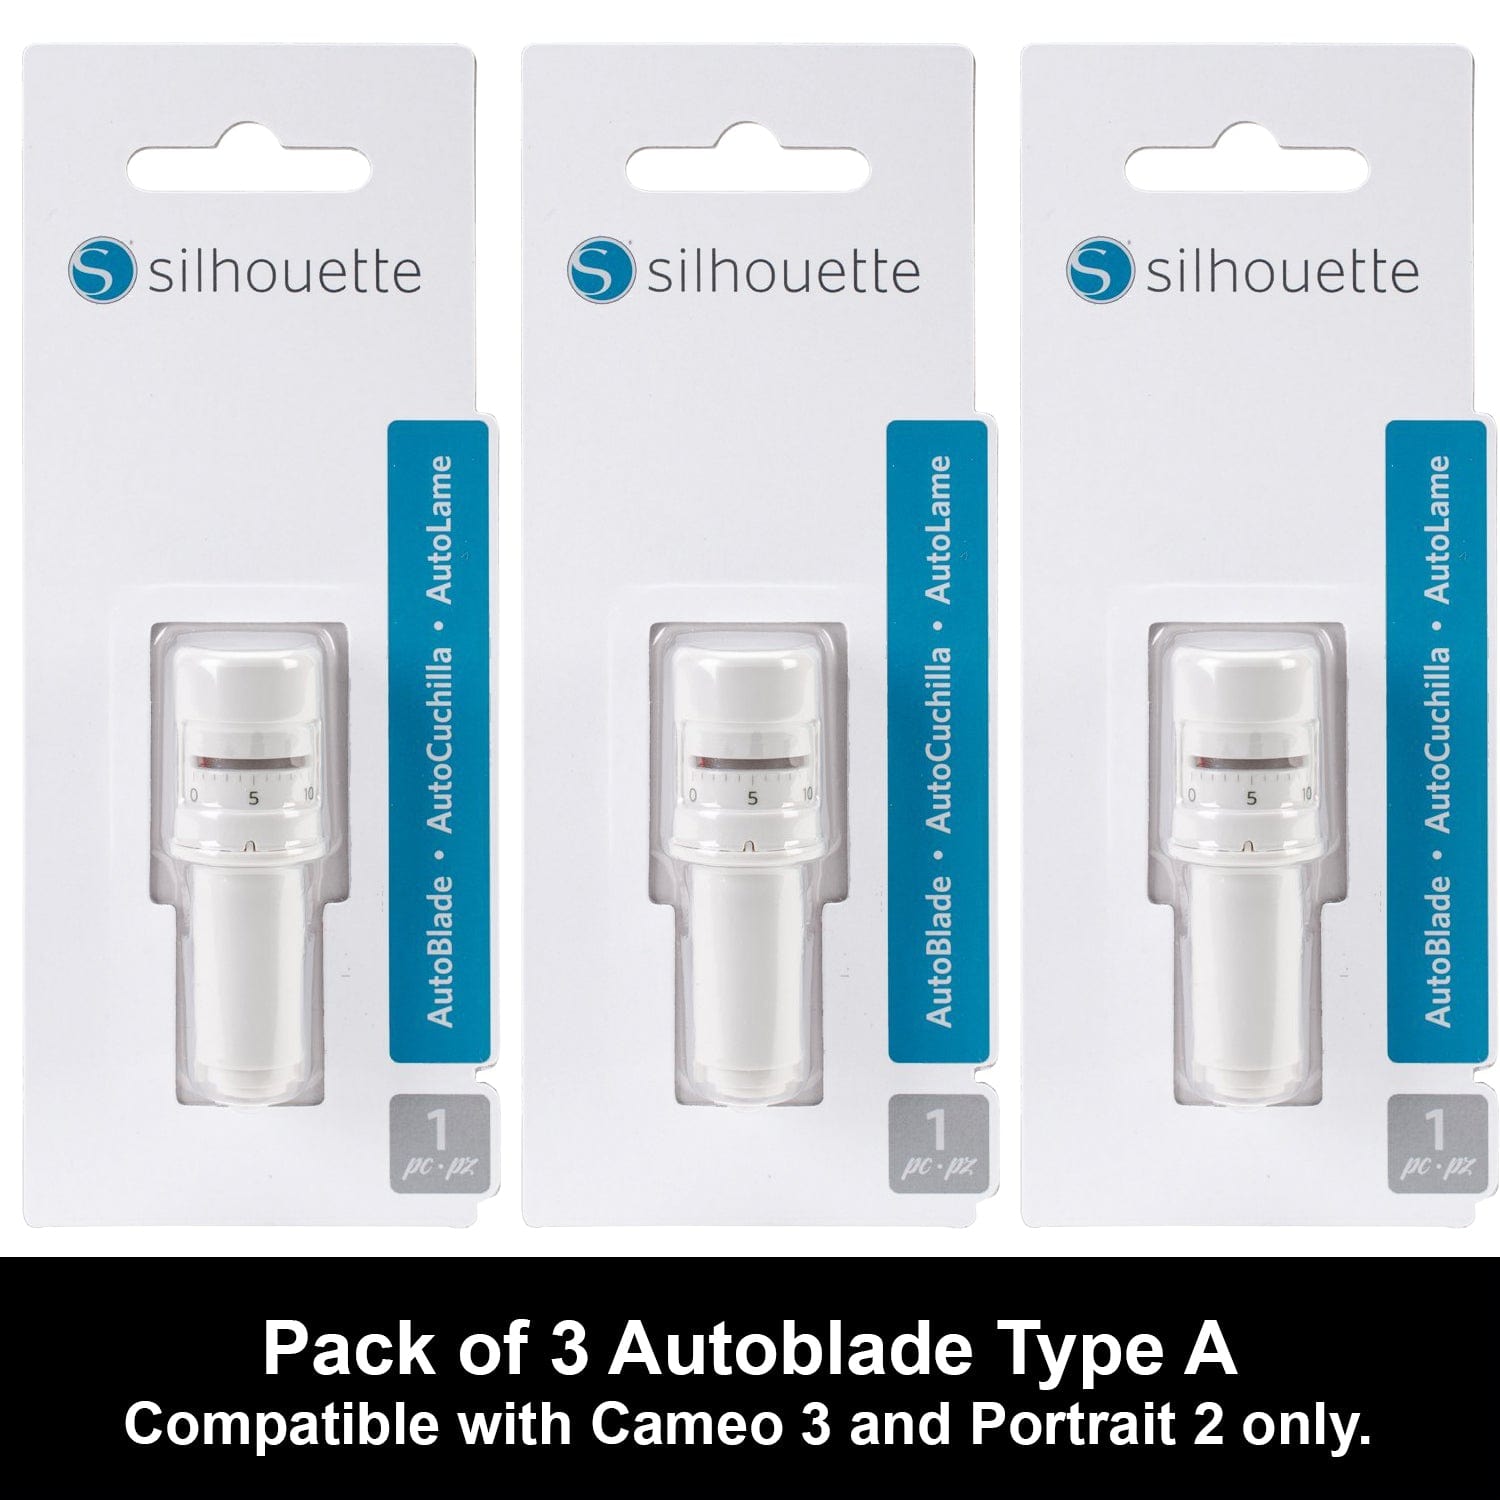 Silhouette Autoblade 3 Pack Replacement Blades for Cameo 3 and